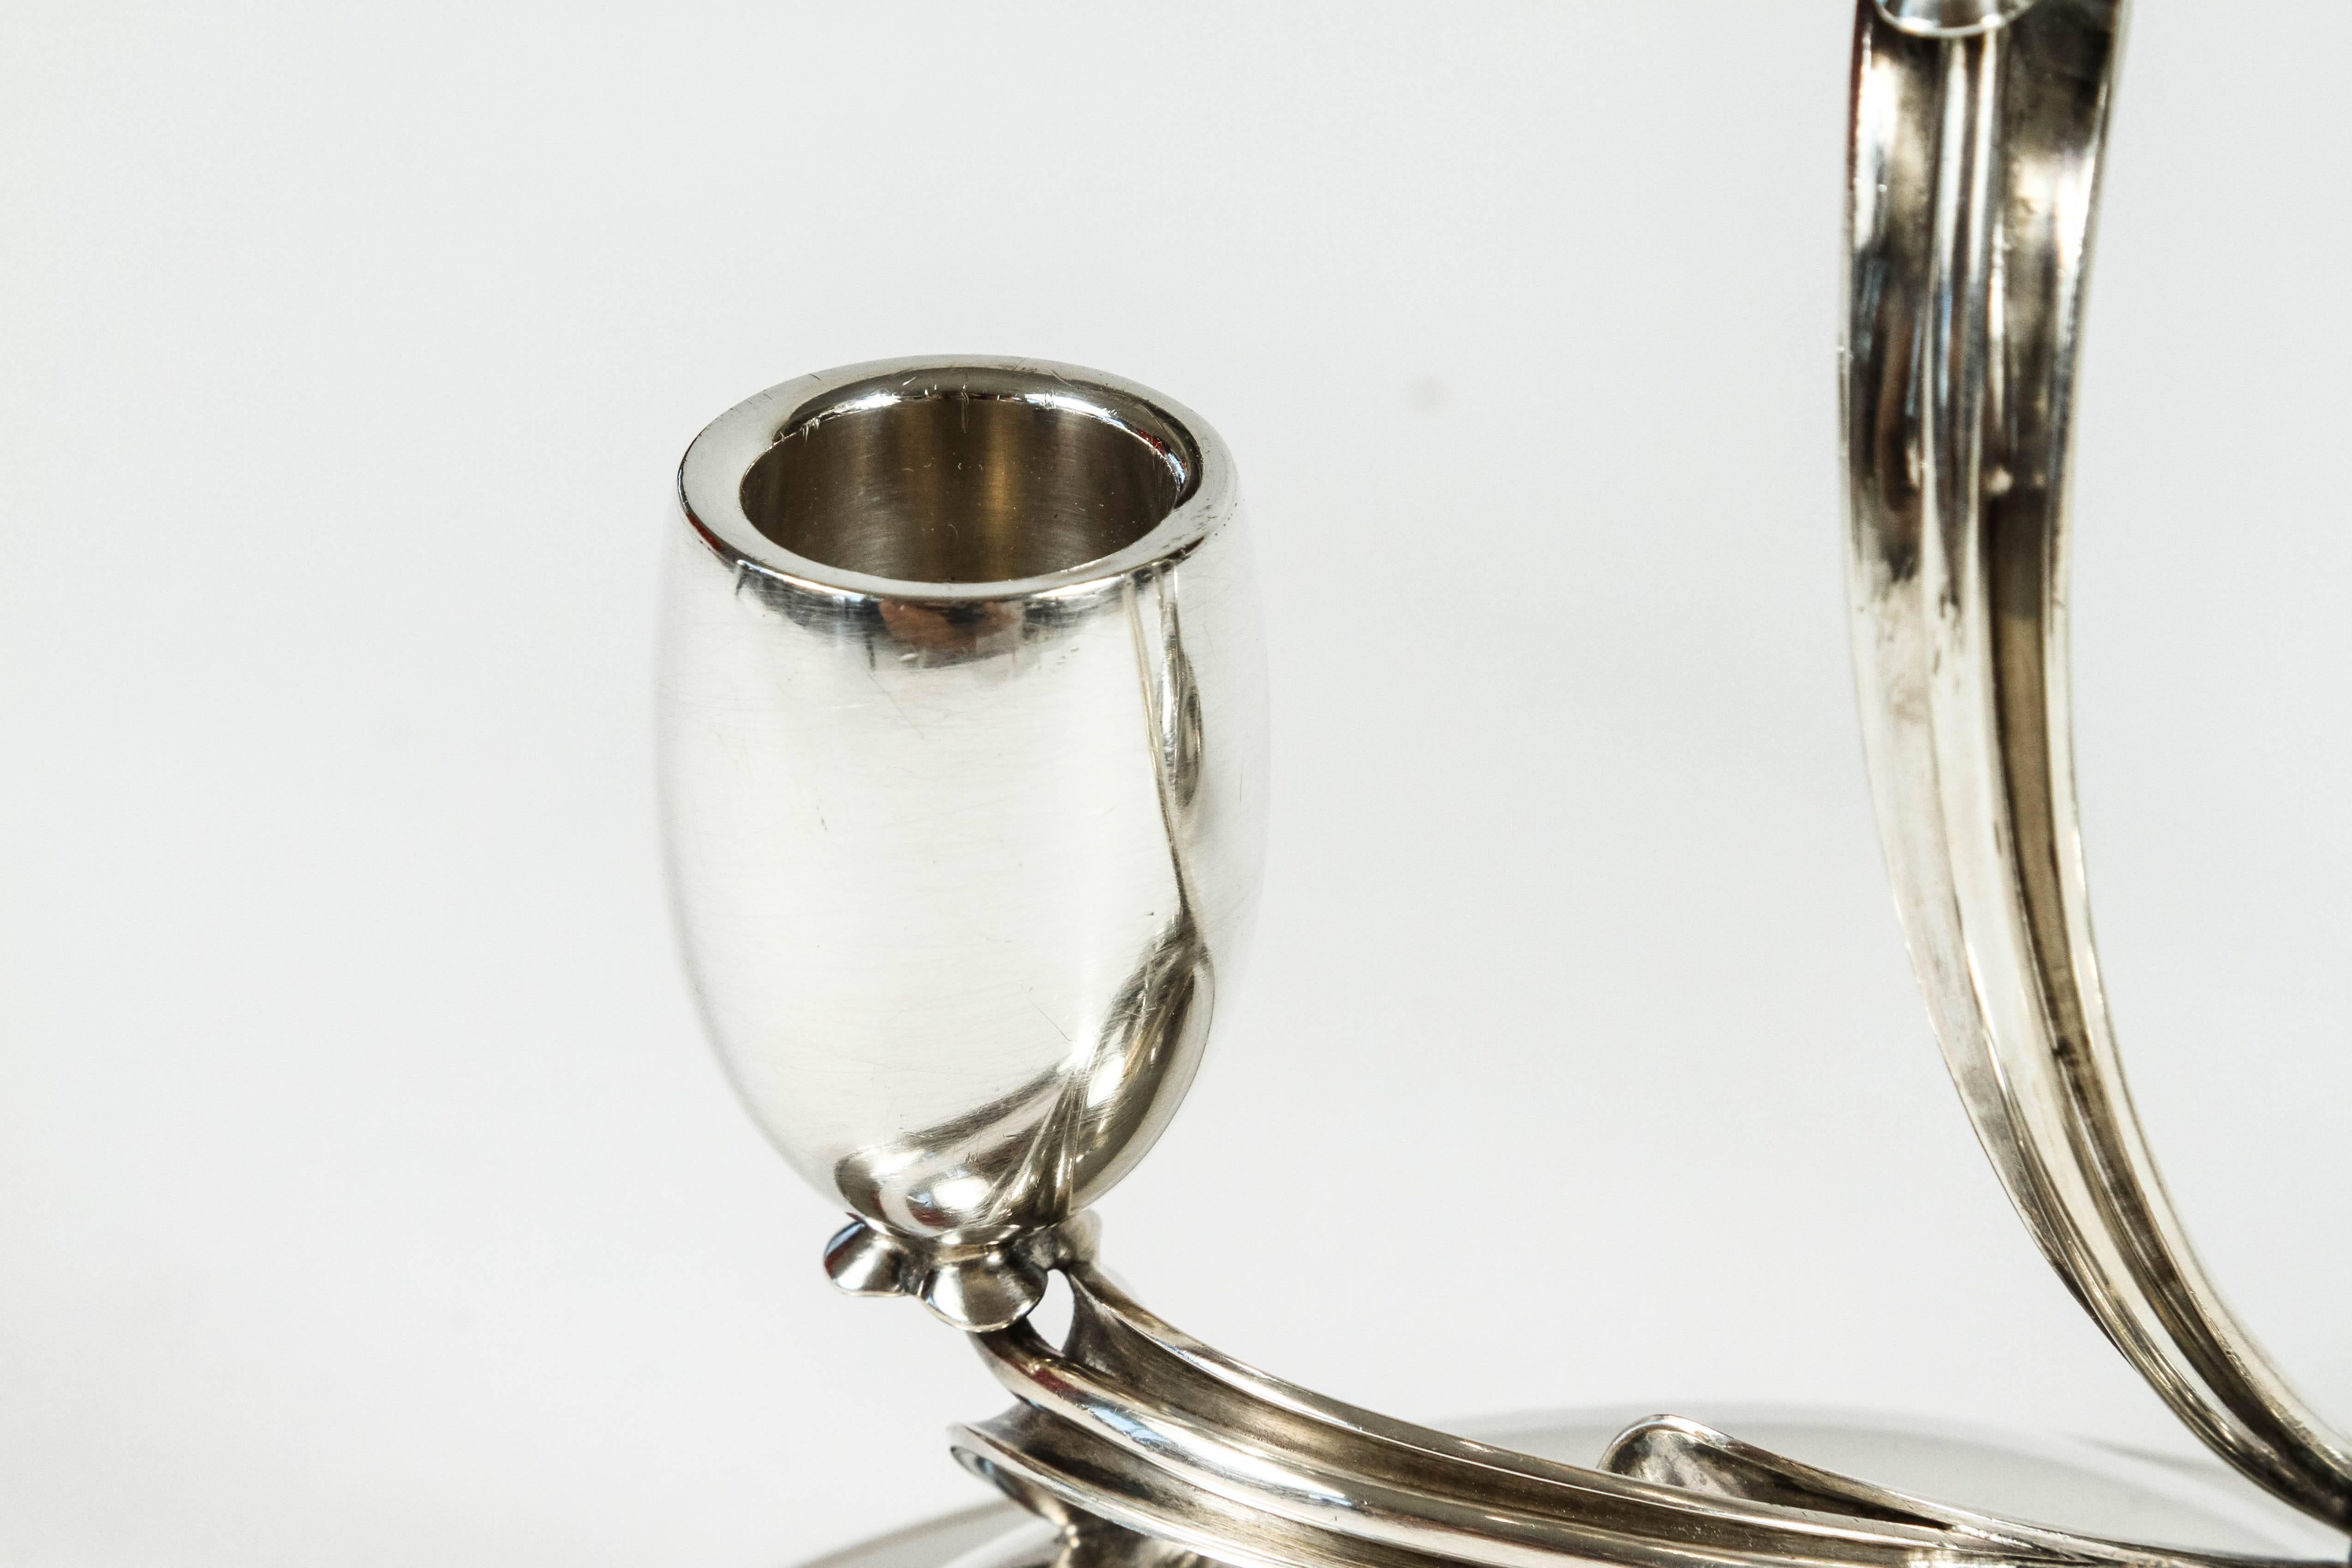 Polished Pair of Sterling Silver Candlesticks by Alphonse La Paglia